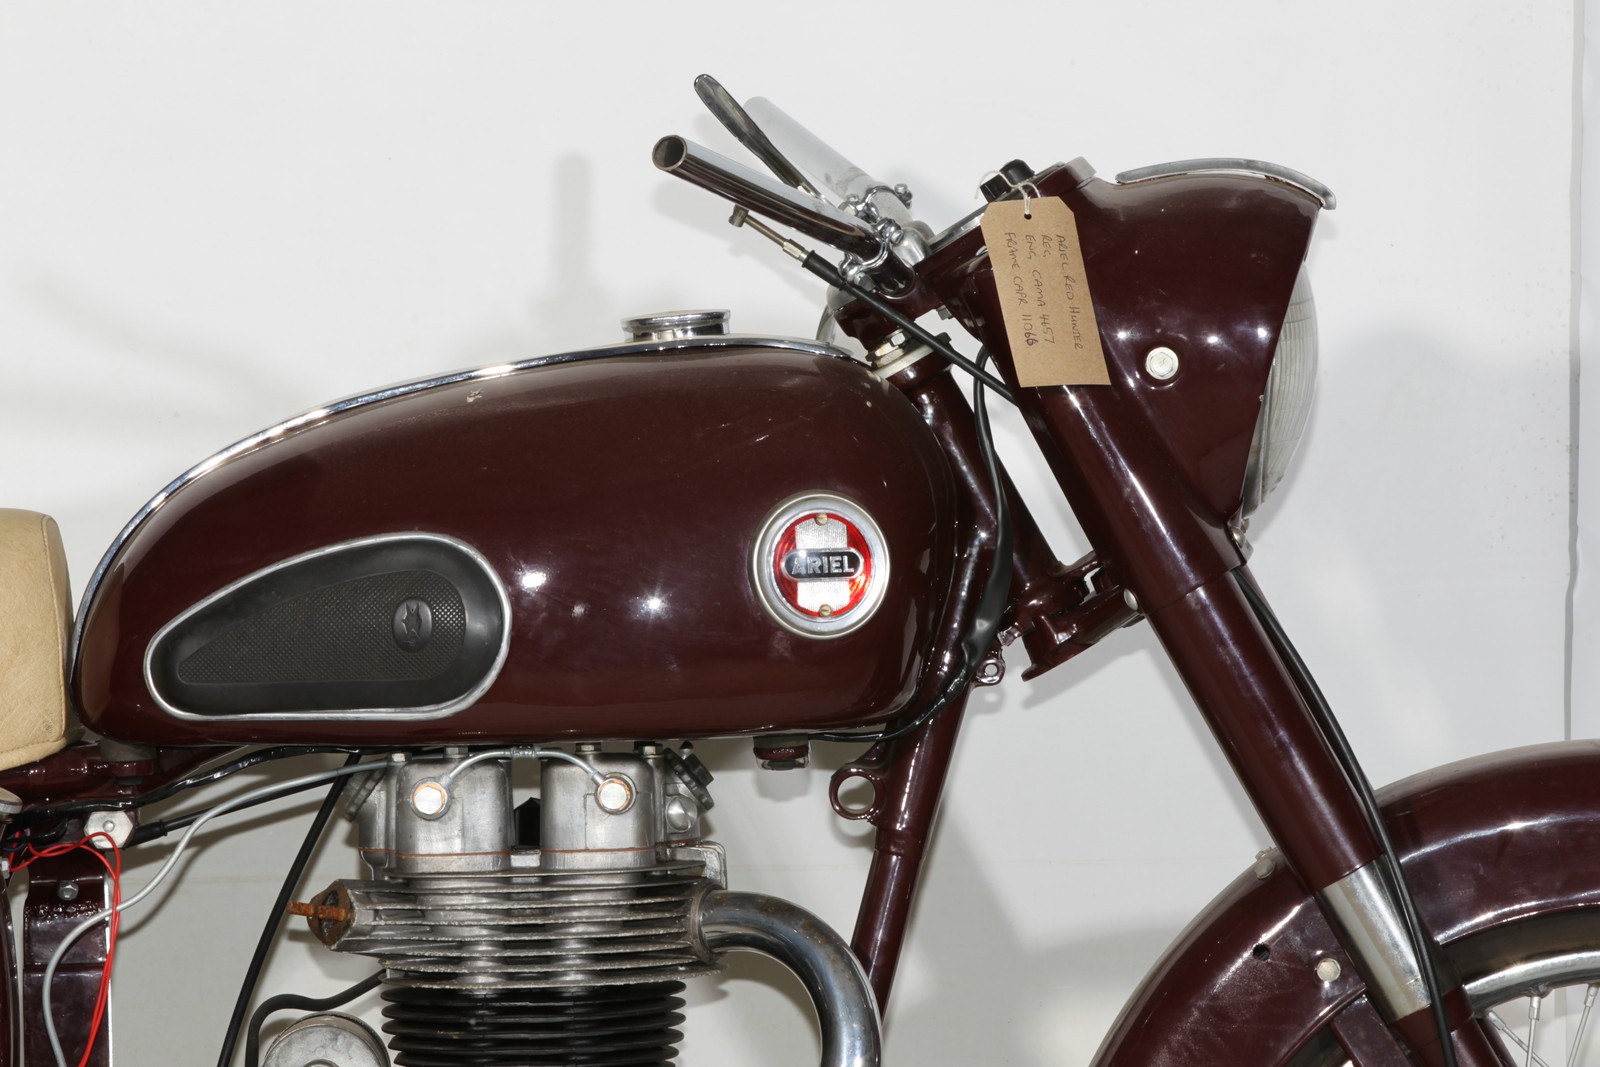 1958 Ariel Red Hunter NH 350cc OHV - Image 3 of 6